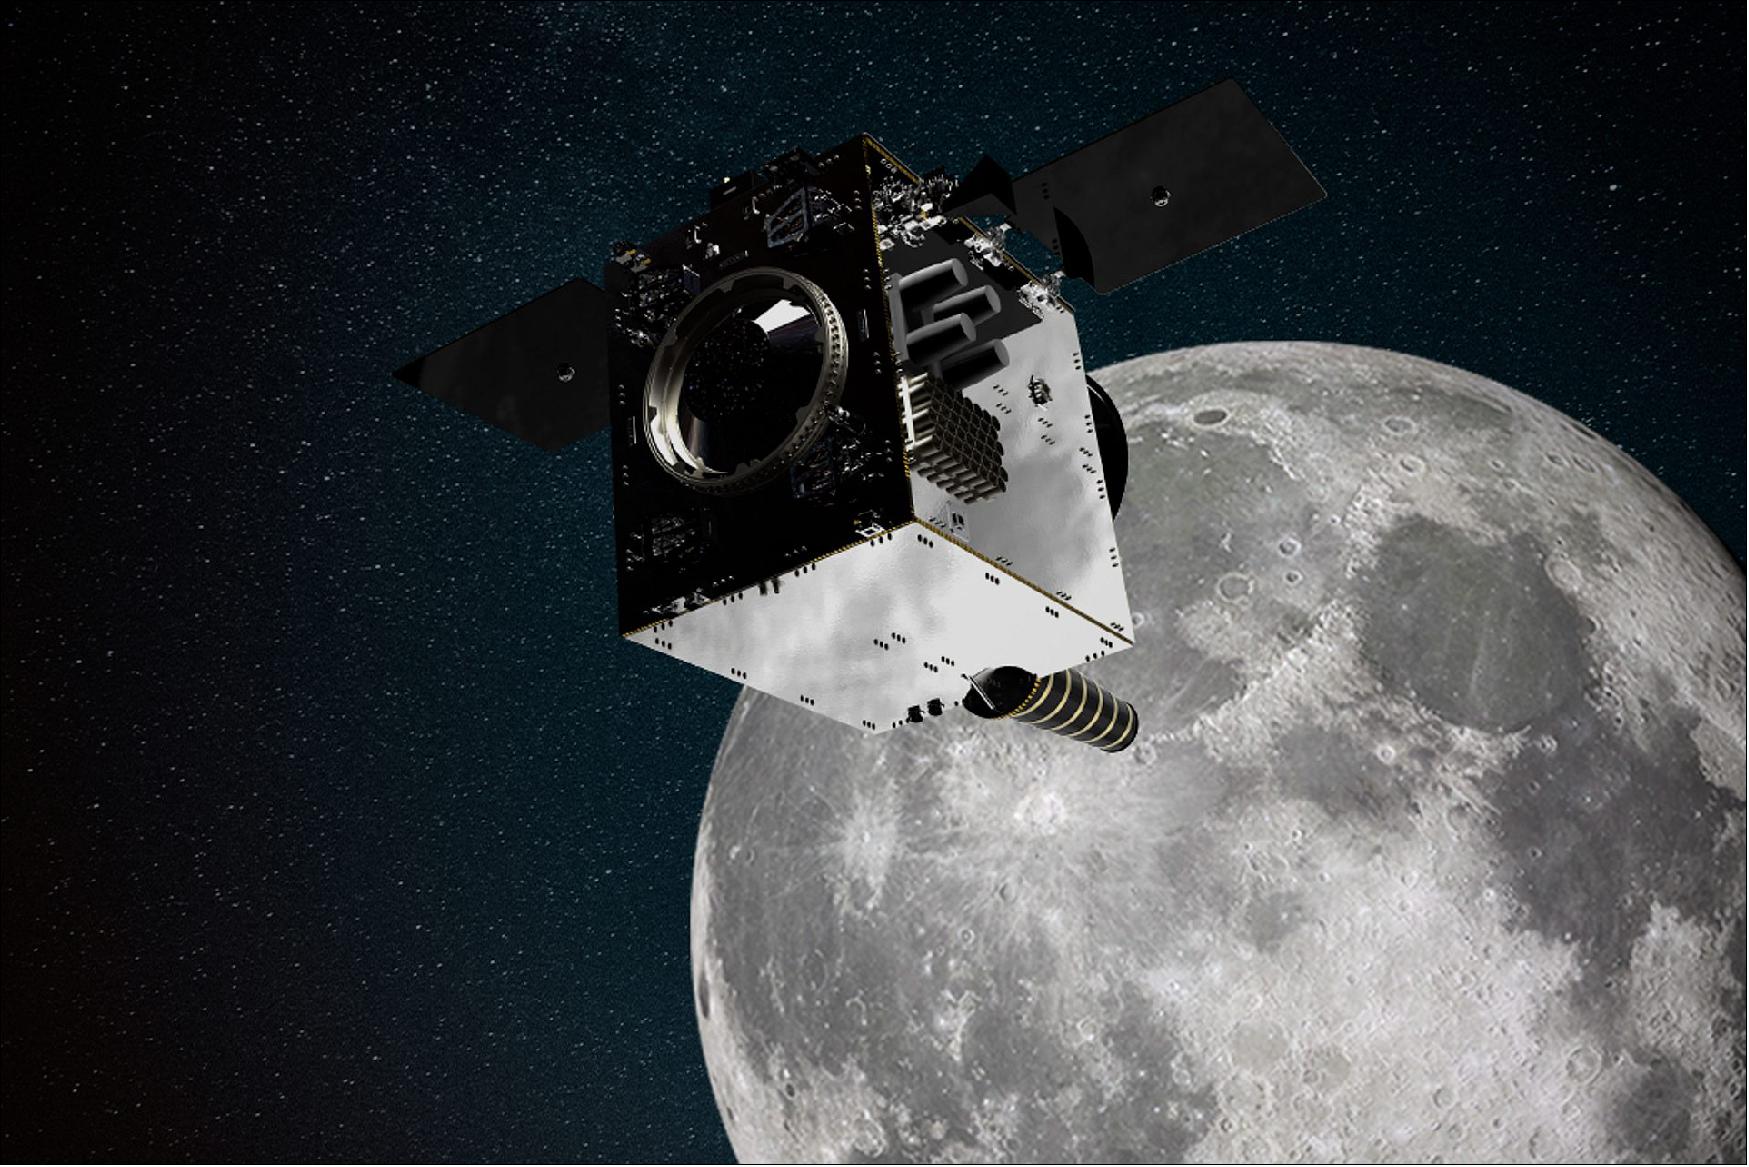 Figure 16: Artist's rendition of SSTL's Lunar Pathfinder satellite that will provide communications services around the Moon (image credit: SSTL)